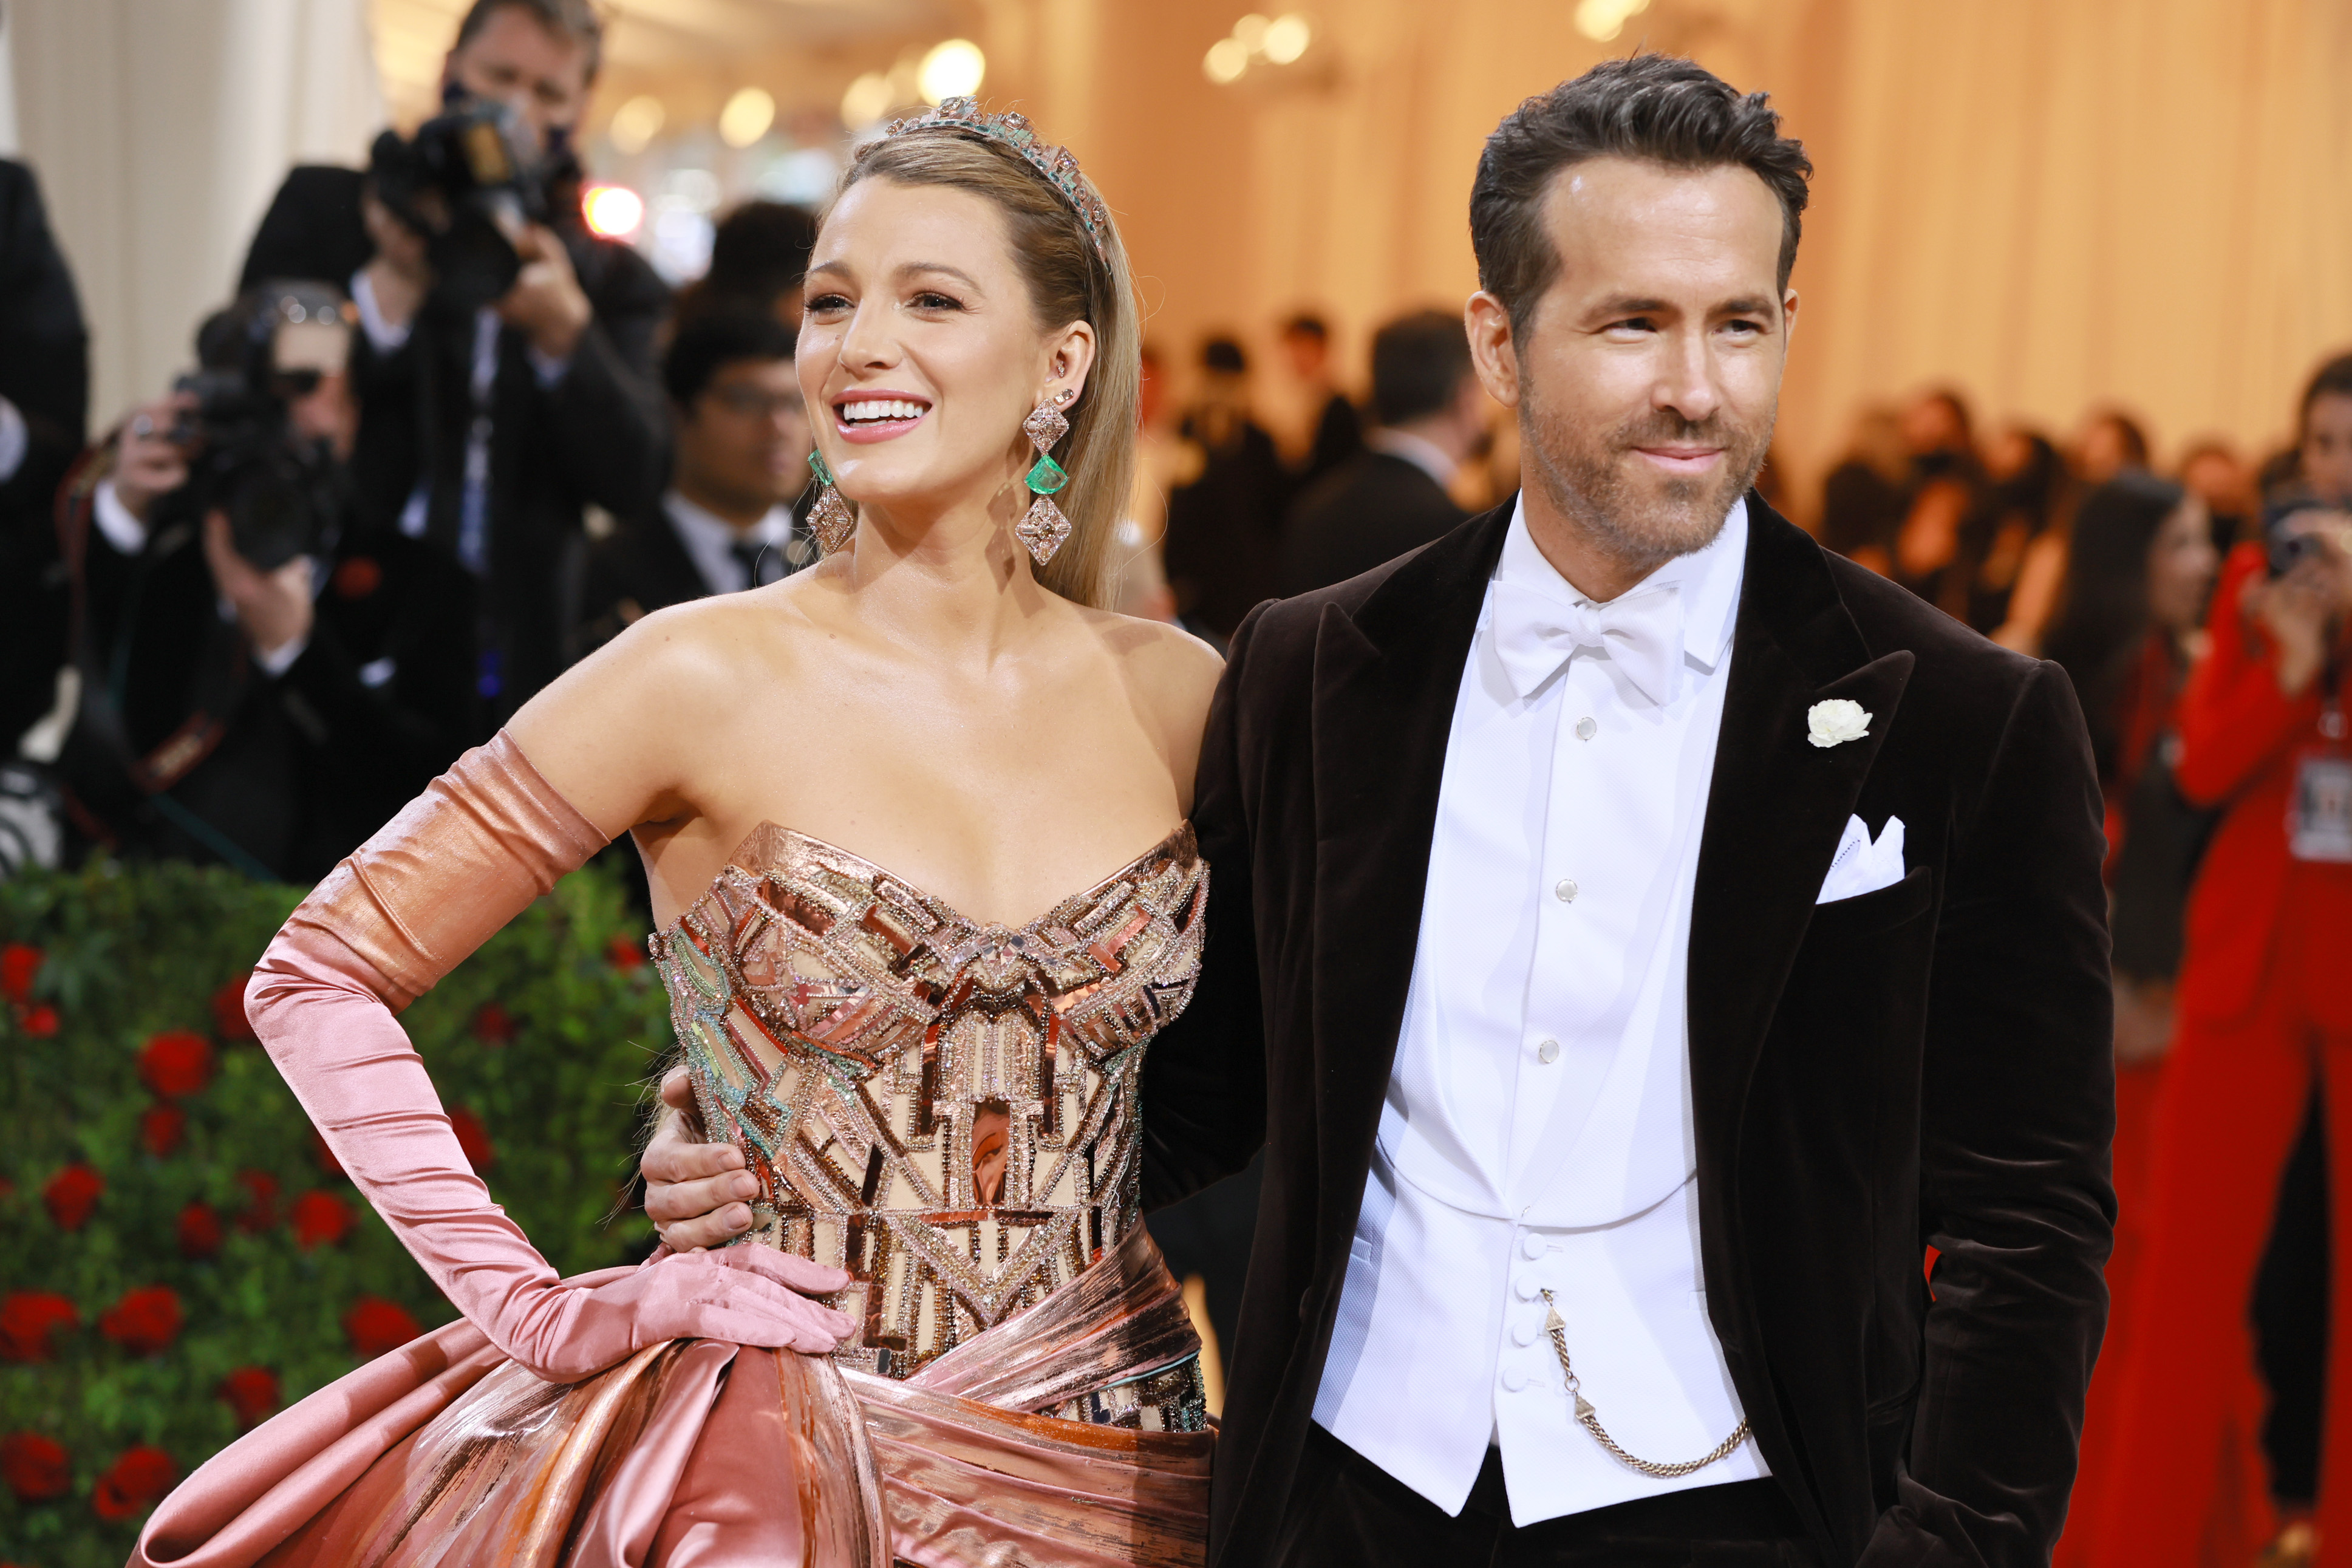 Met Gala 2023: How to Watch the Red Carpet From Home